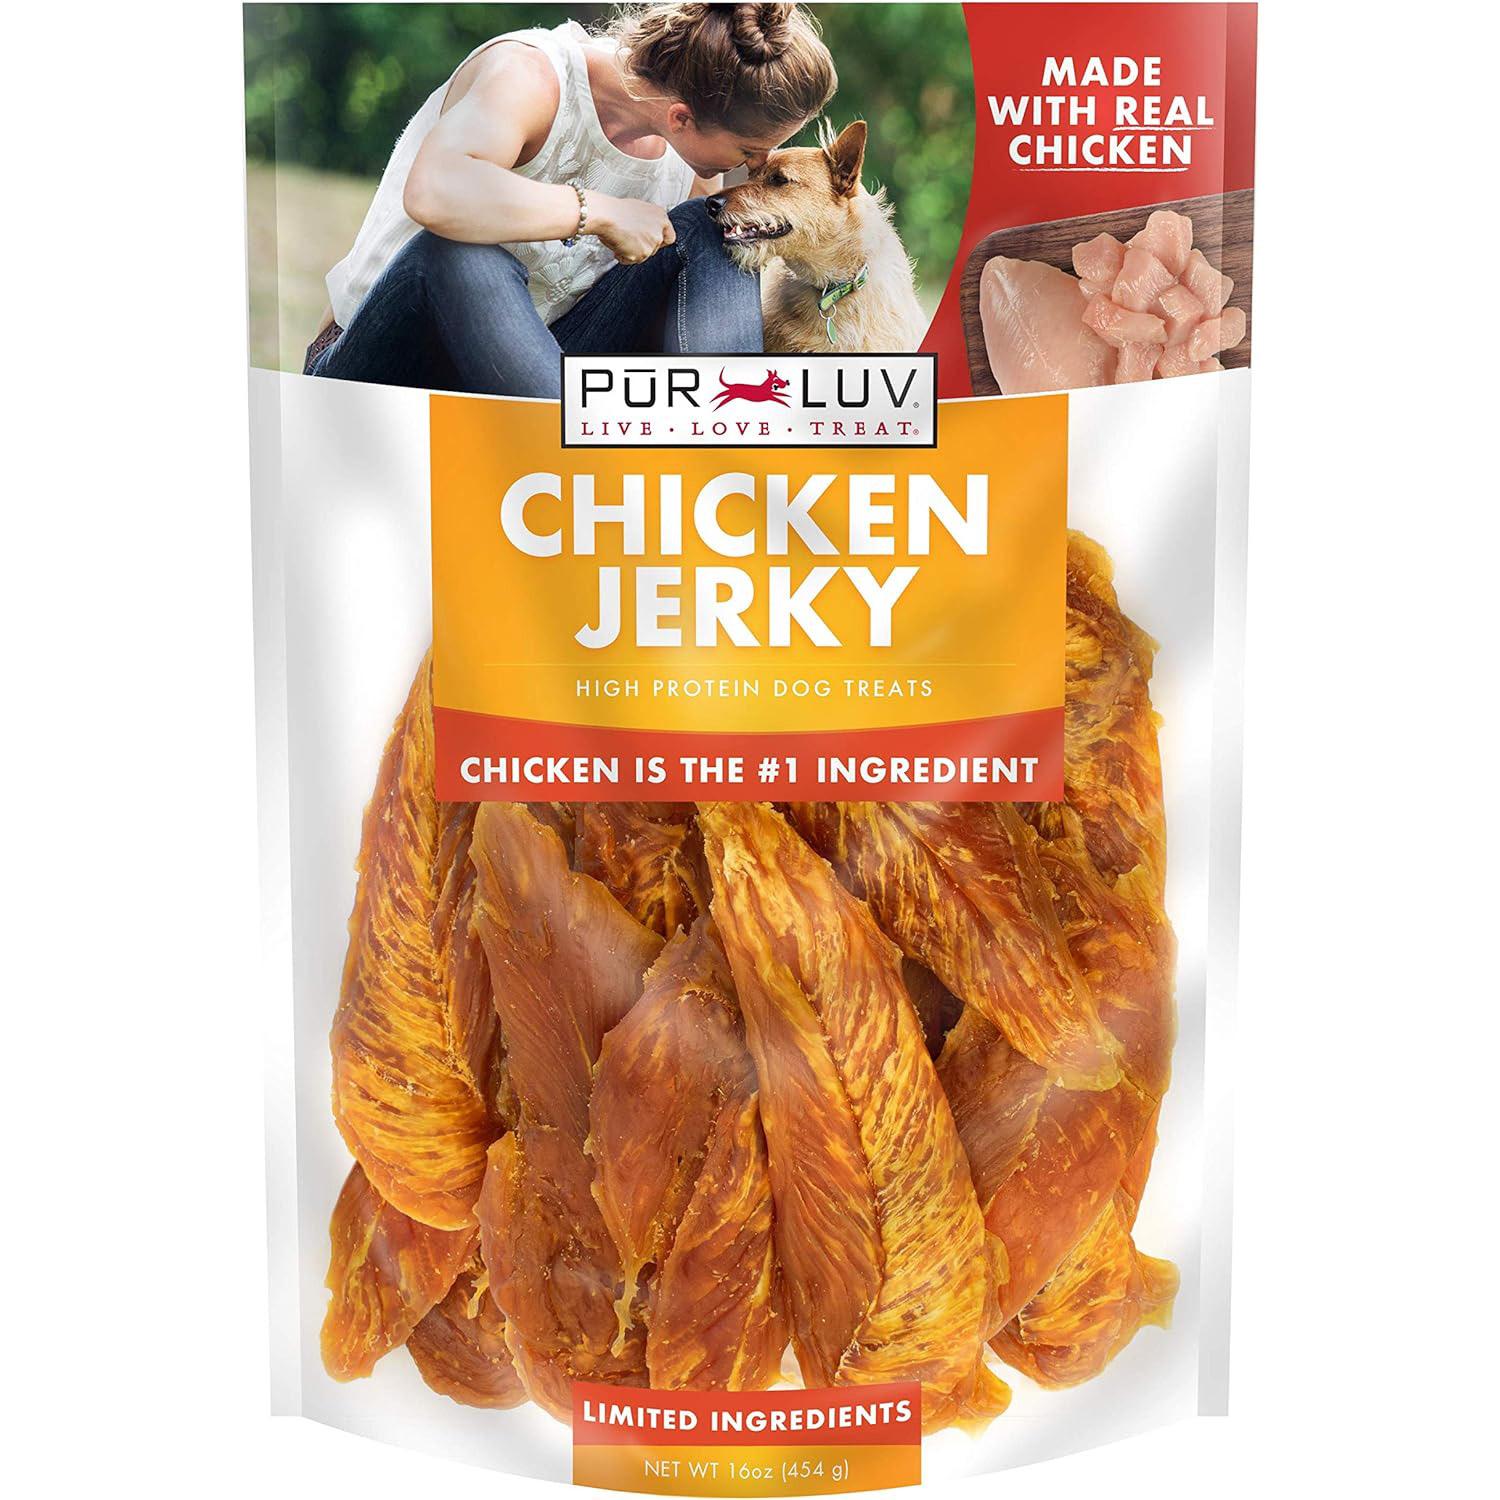 Pur Luv Chicken Jerky Dog Treats for $6.59